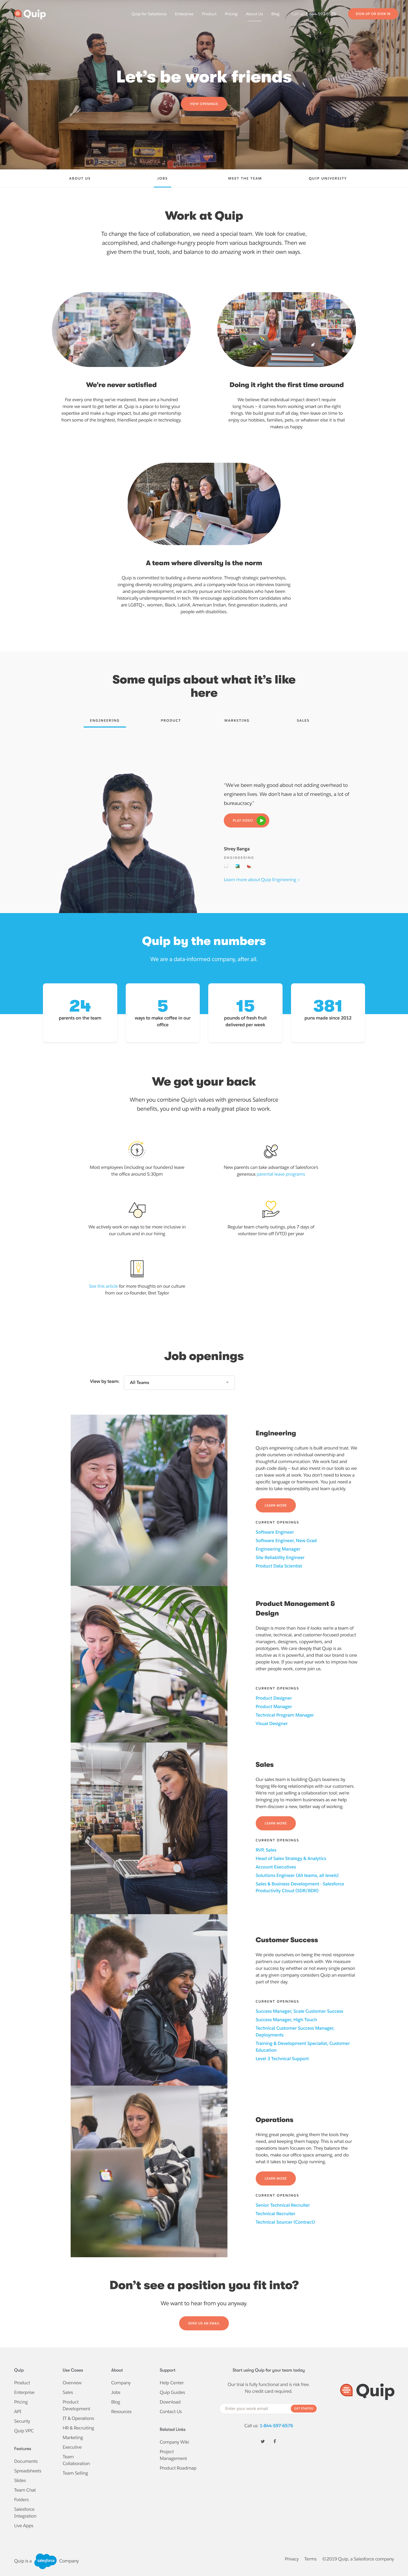 Screenshot of the Jobs page from the Quip website.